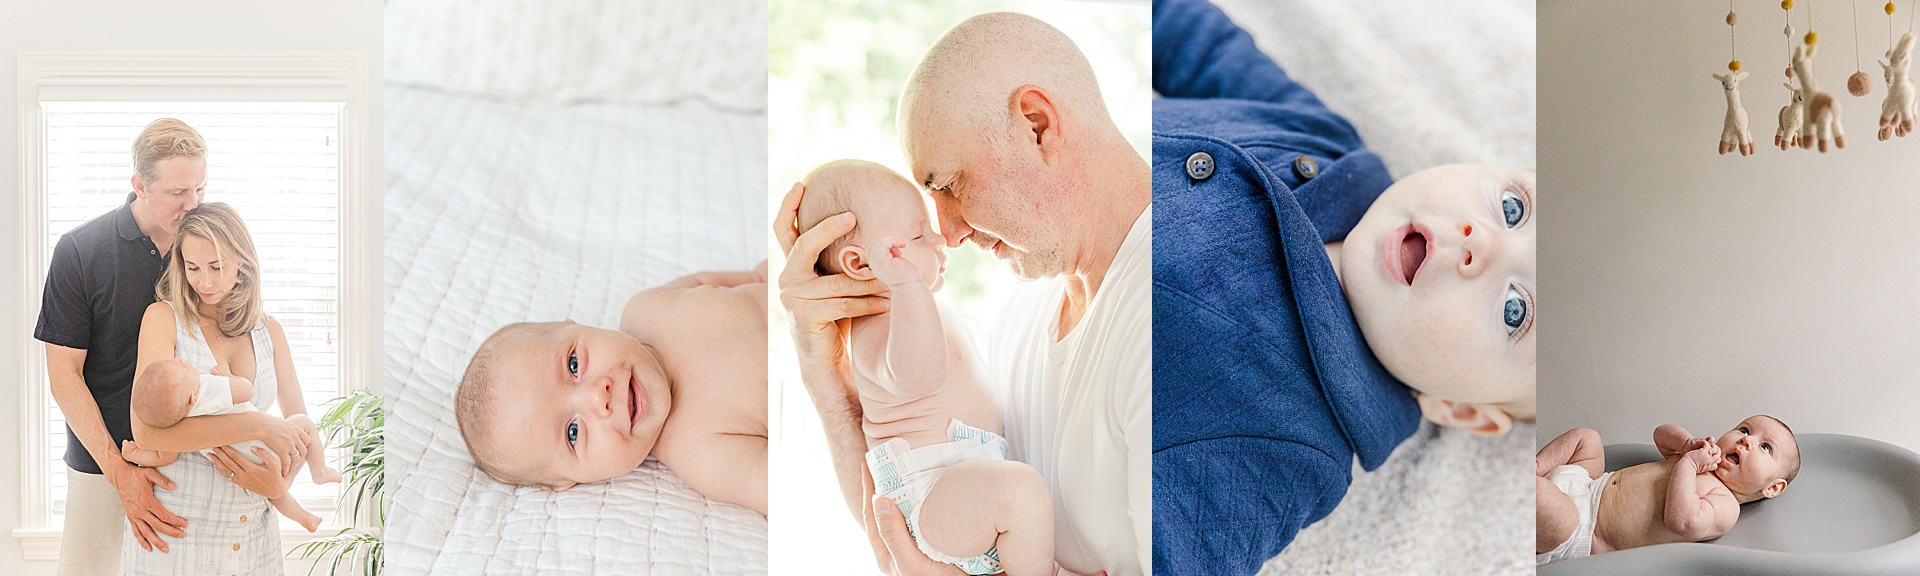 newborn photos with babies age 3-6 months with Sara Sniderman Photography in Natick Massachusetts